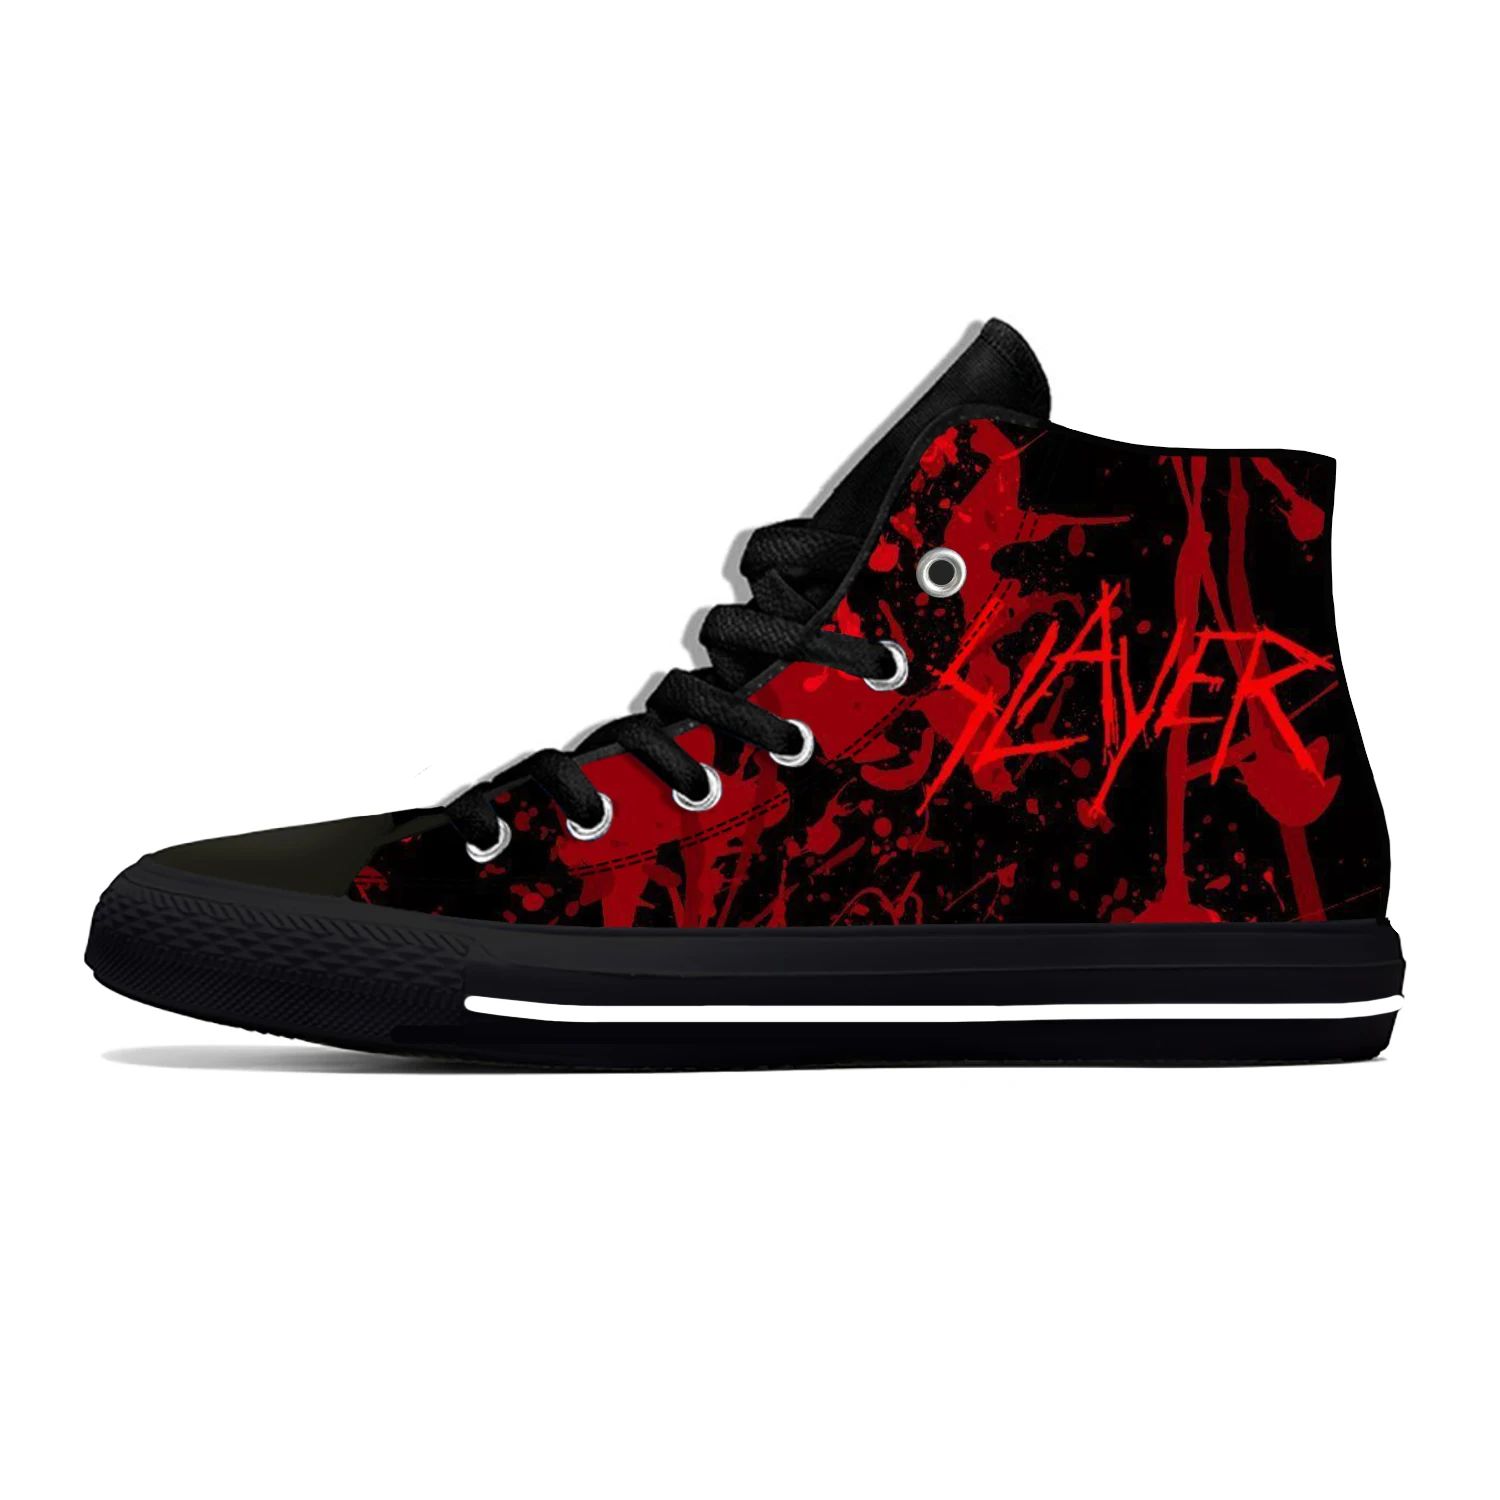 Couleur: Slayer14Shoe Taille: 10